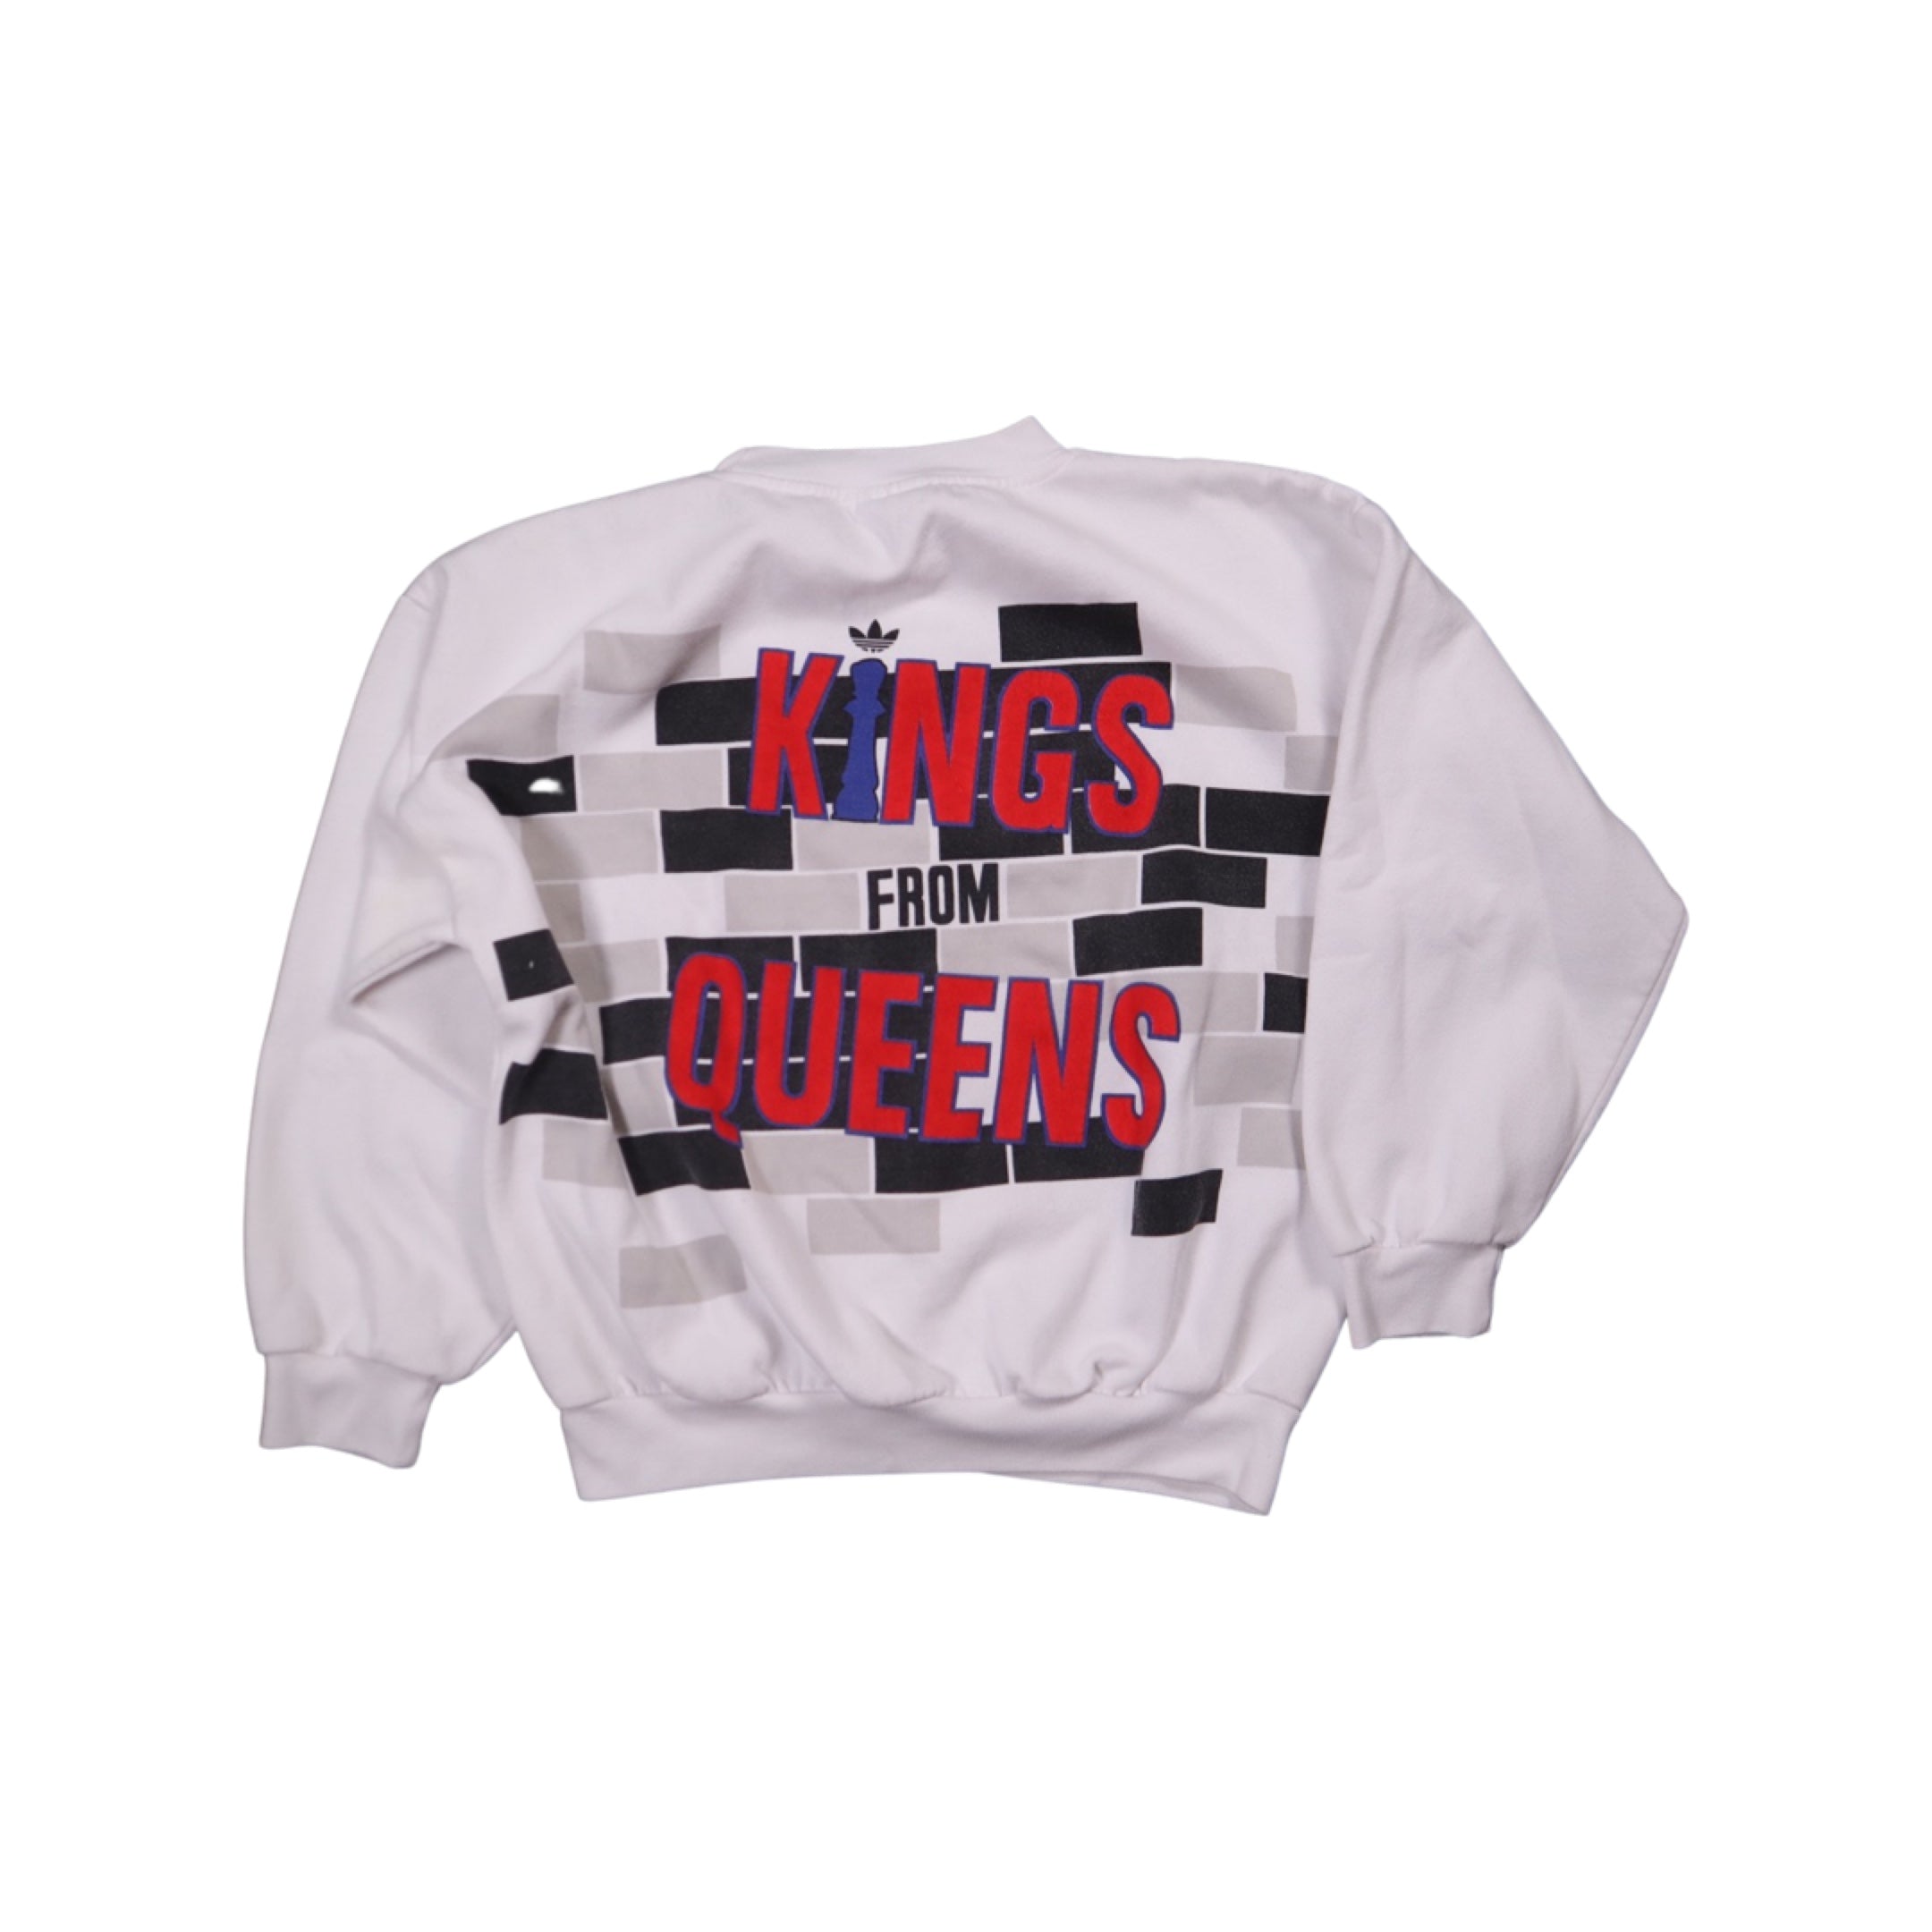 Run DMC Kings and Queens 80s Adidas Sweater Grail (Large)